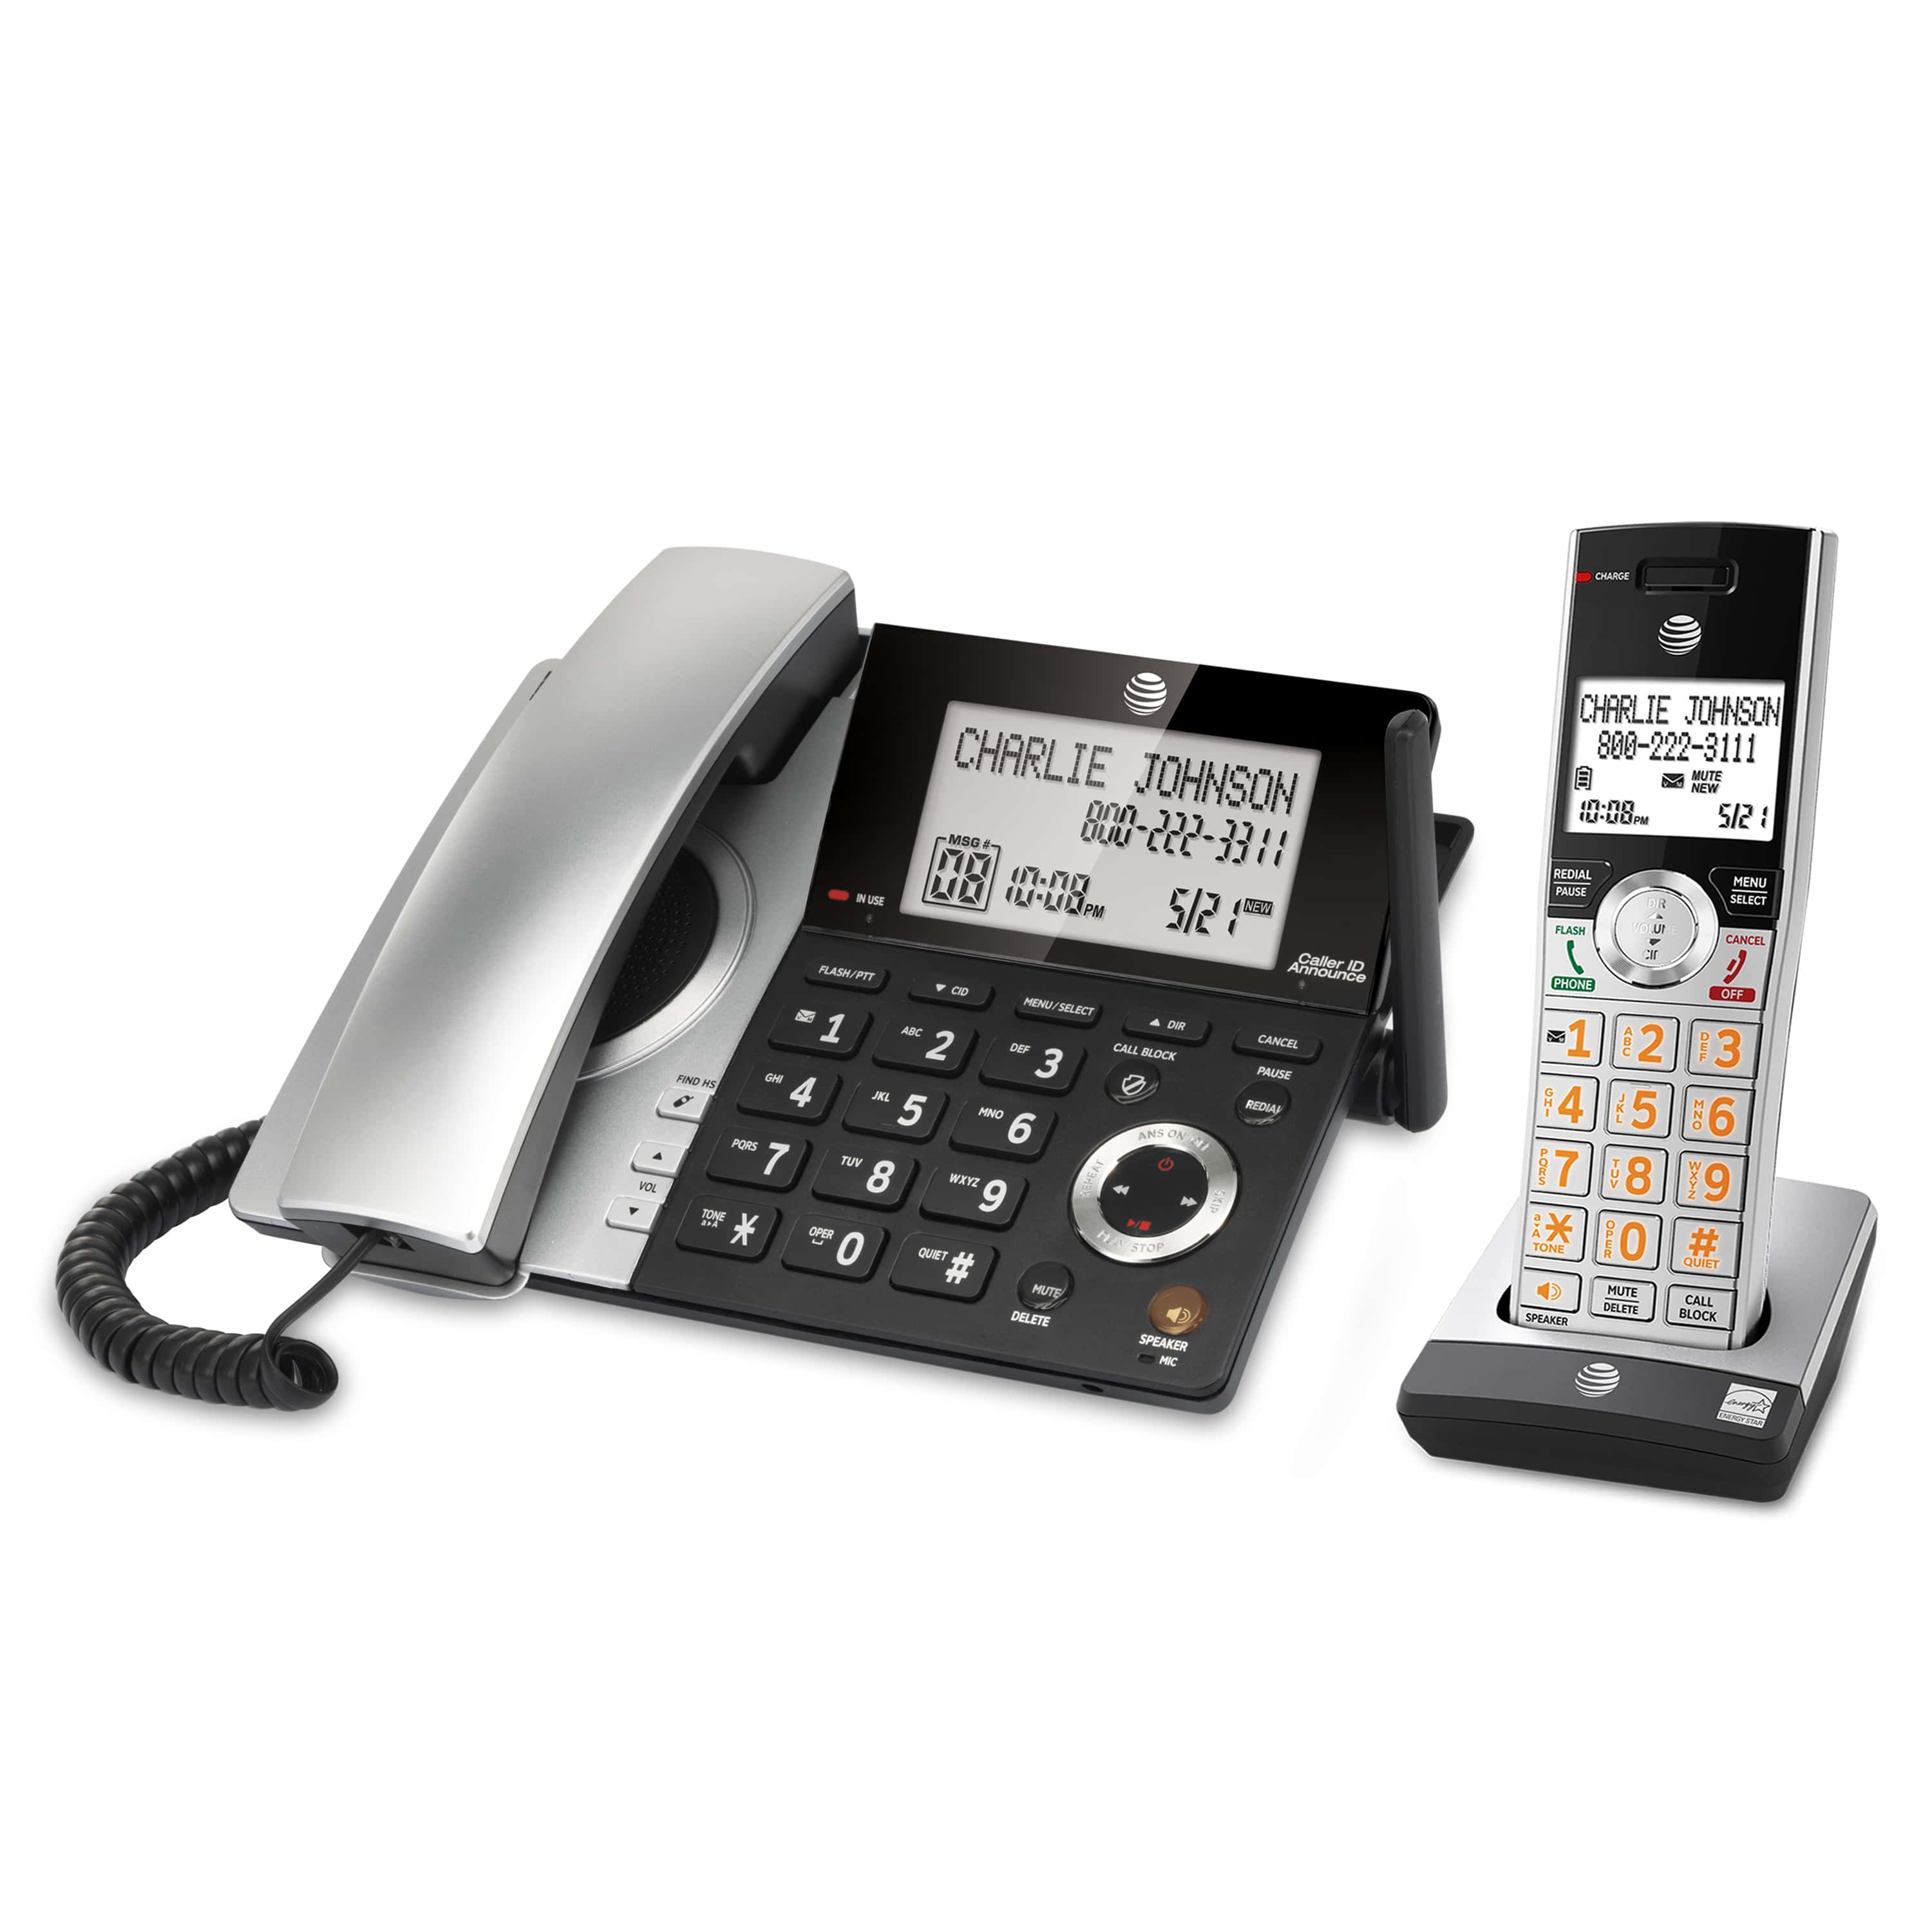 Corded/cordless answering system with smart call blocker - view 2